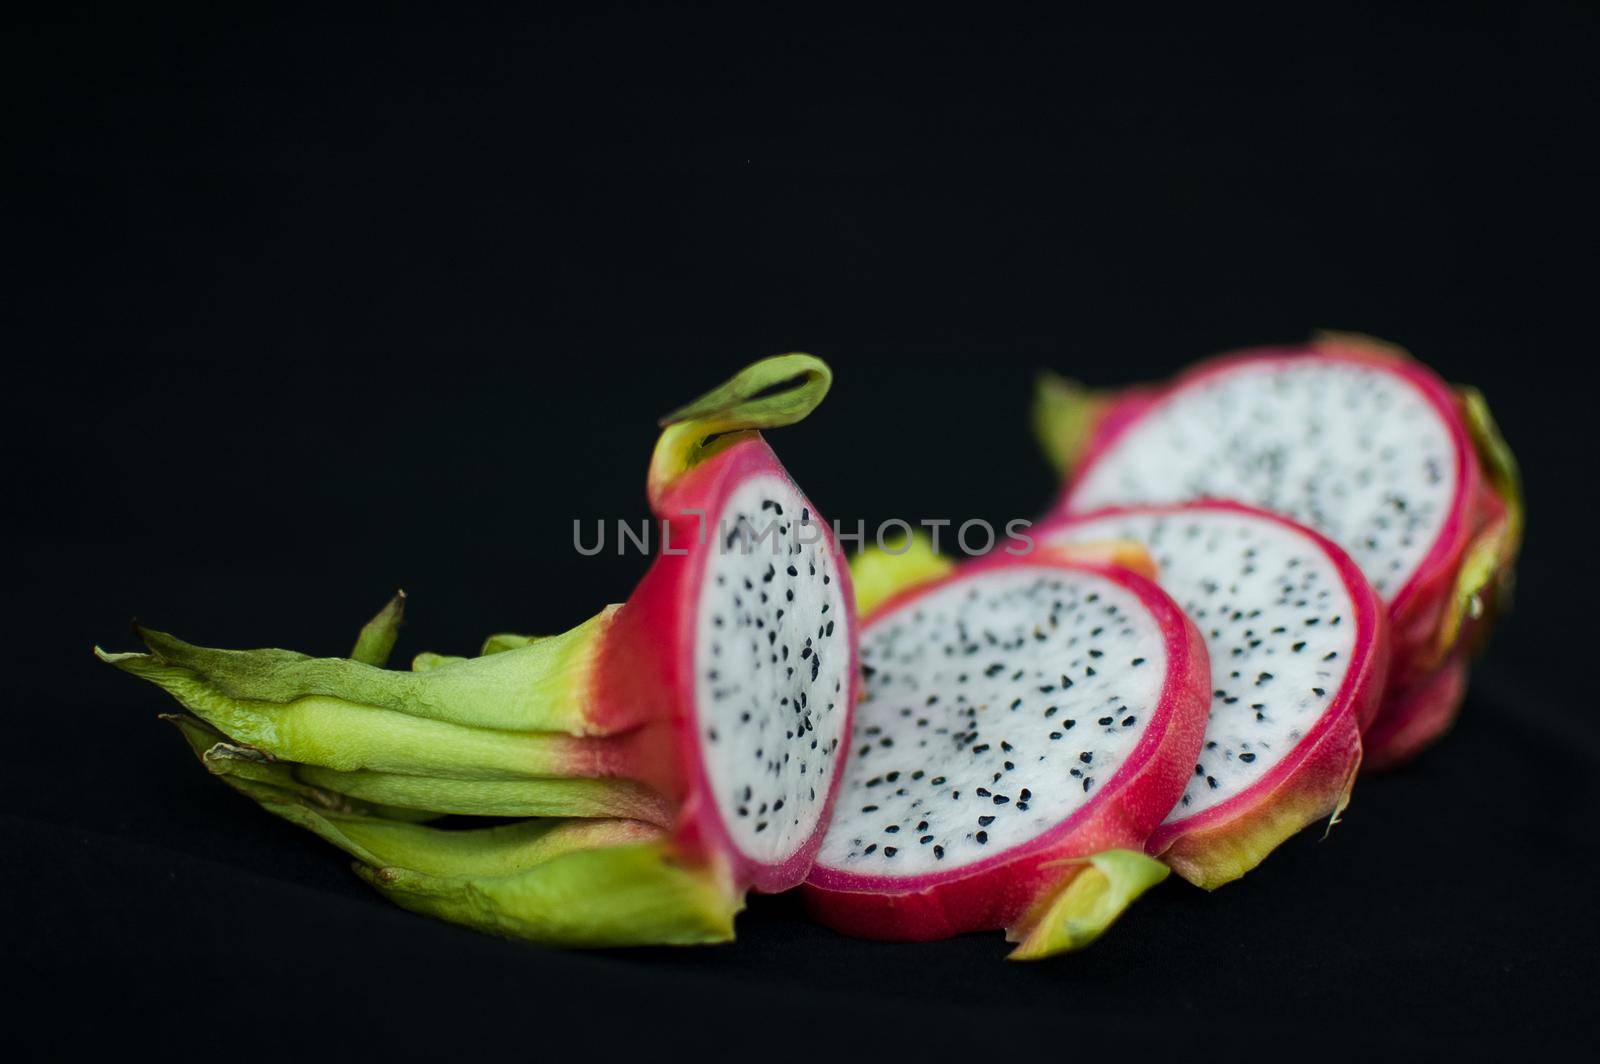 Slices of dragon fruit or pitaya with pink skin and white pulp with seeds on black background. Exotic fruits, healthy eating concept by balinska_lv